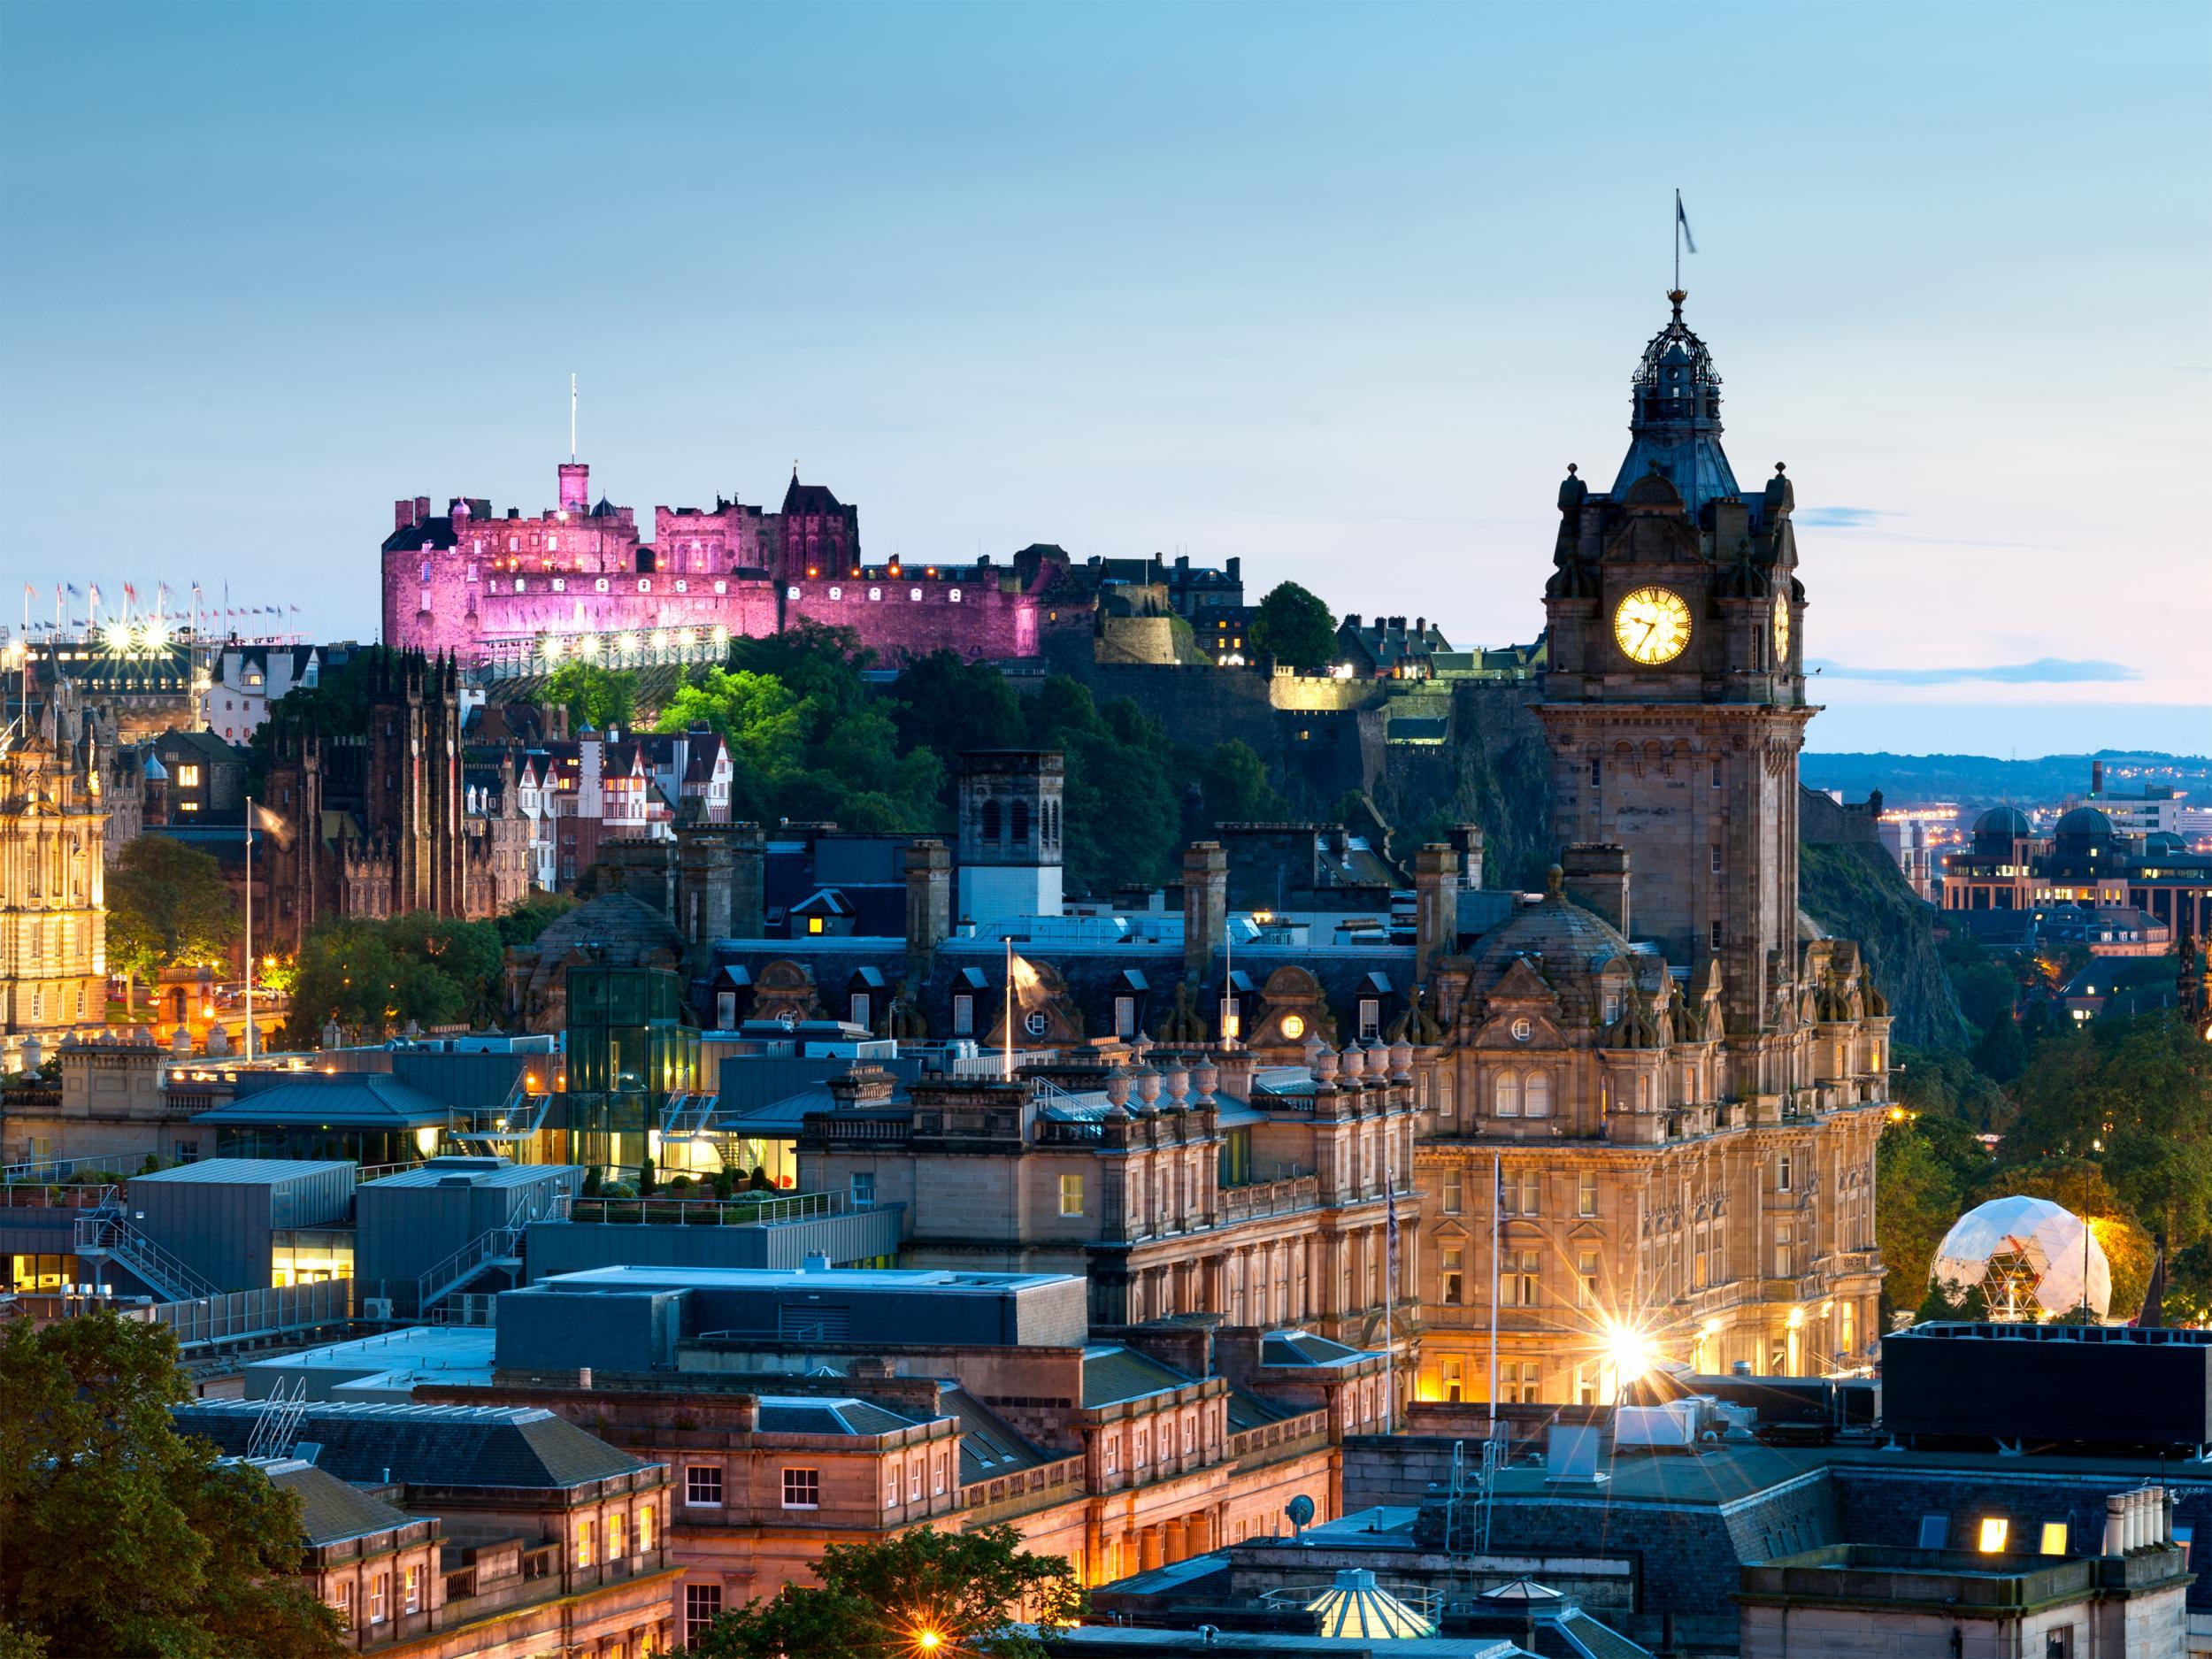 Edinburgh was first on the list for the best city to live and work in